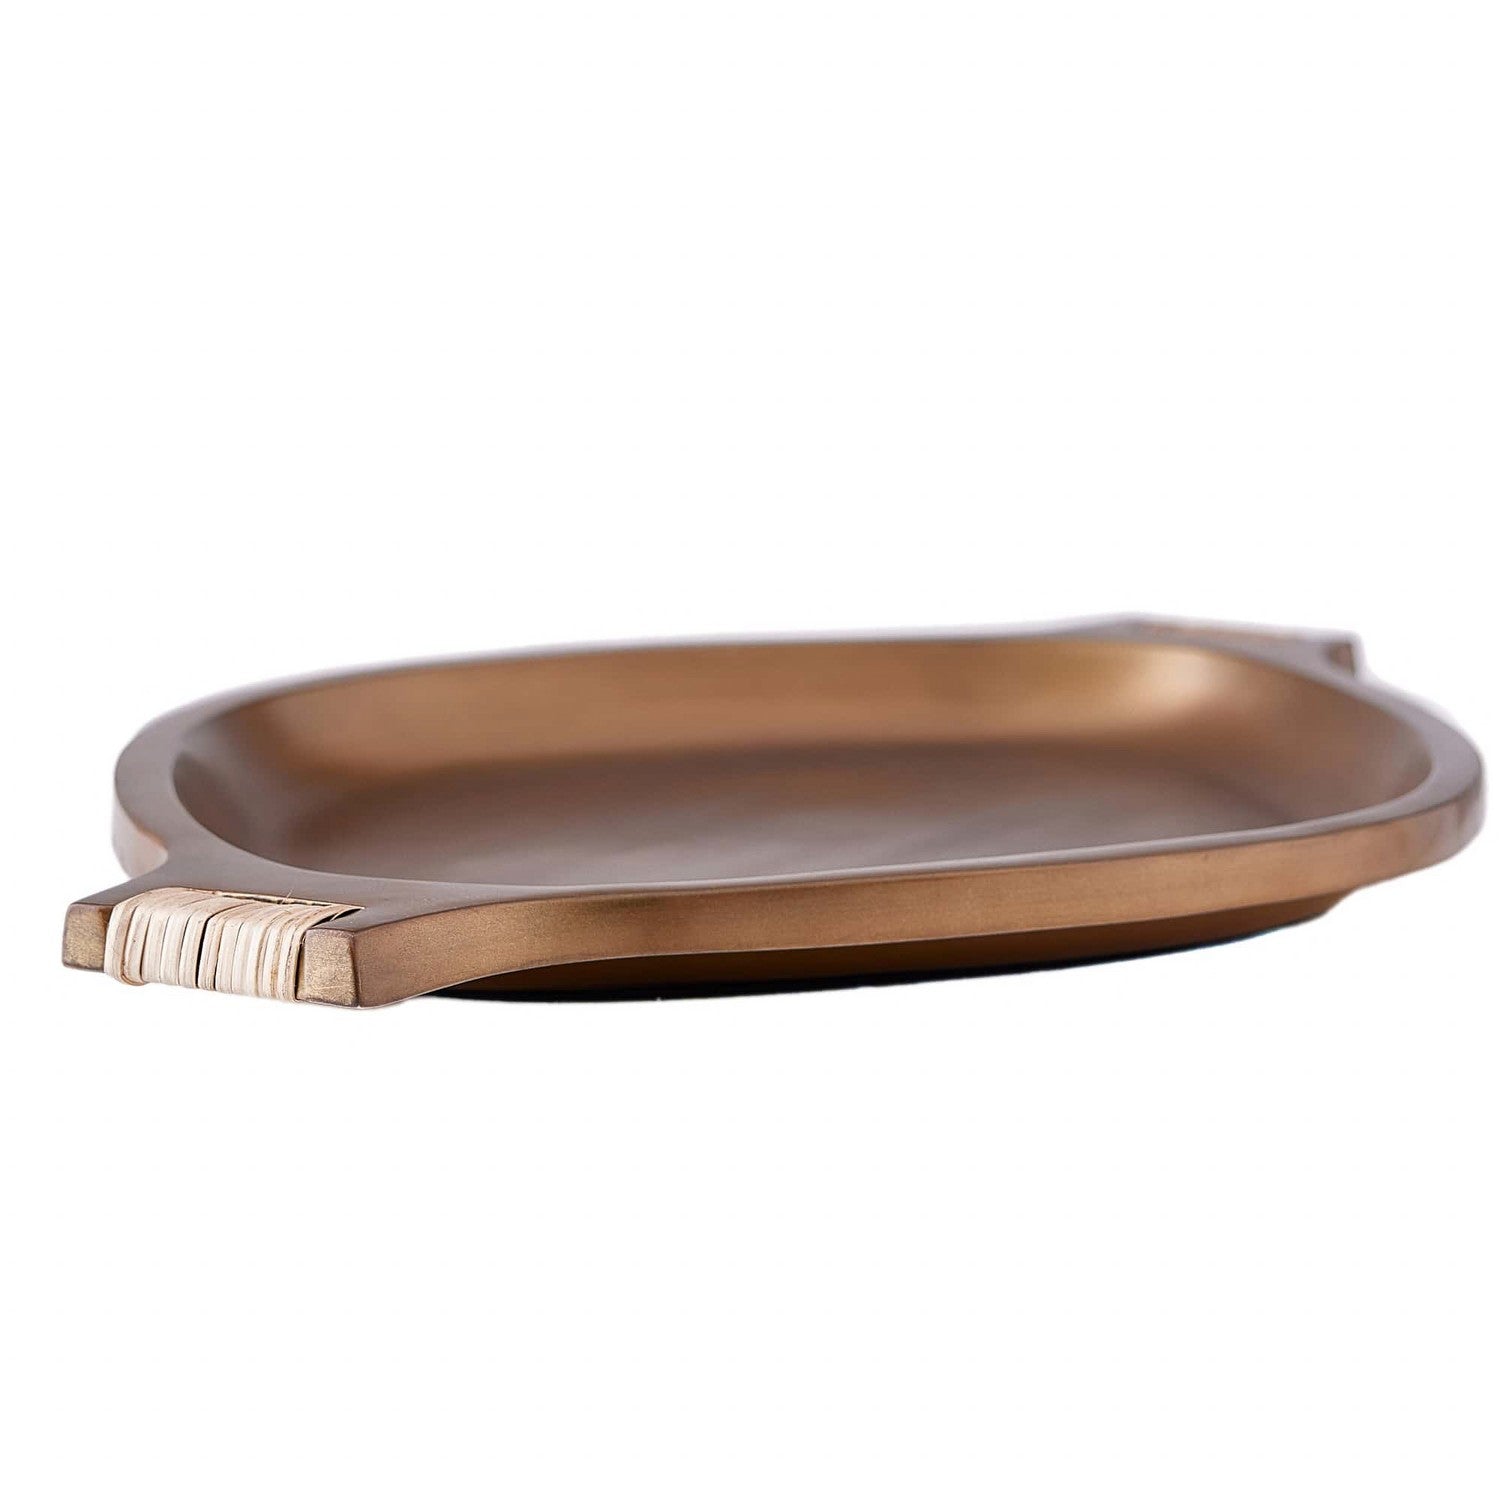 Tray from the Tharon collection in Antique Brass finish